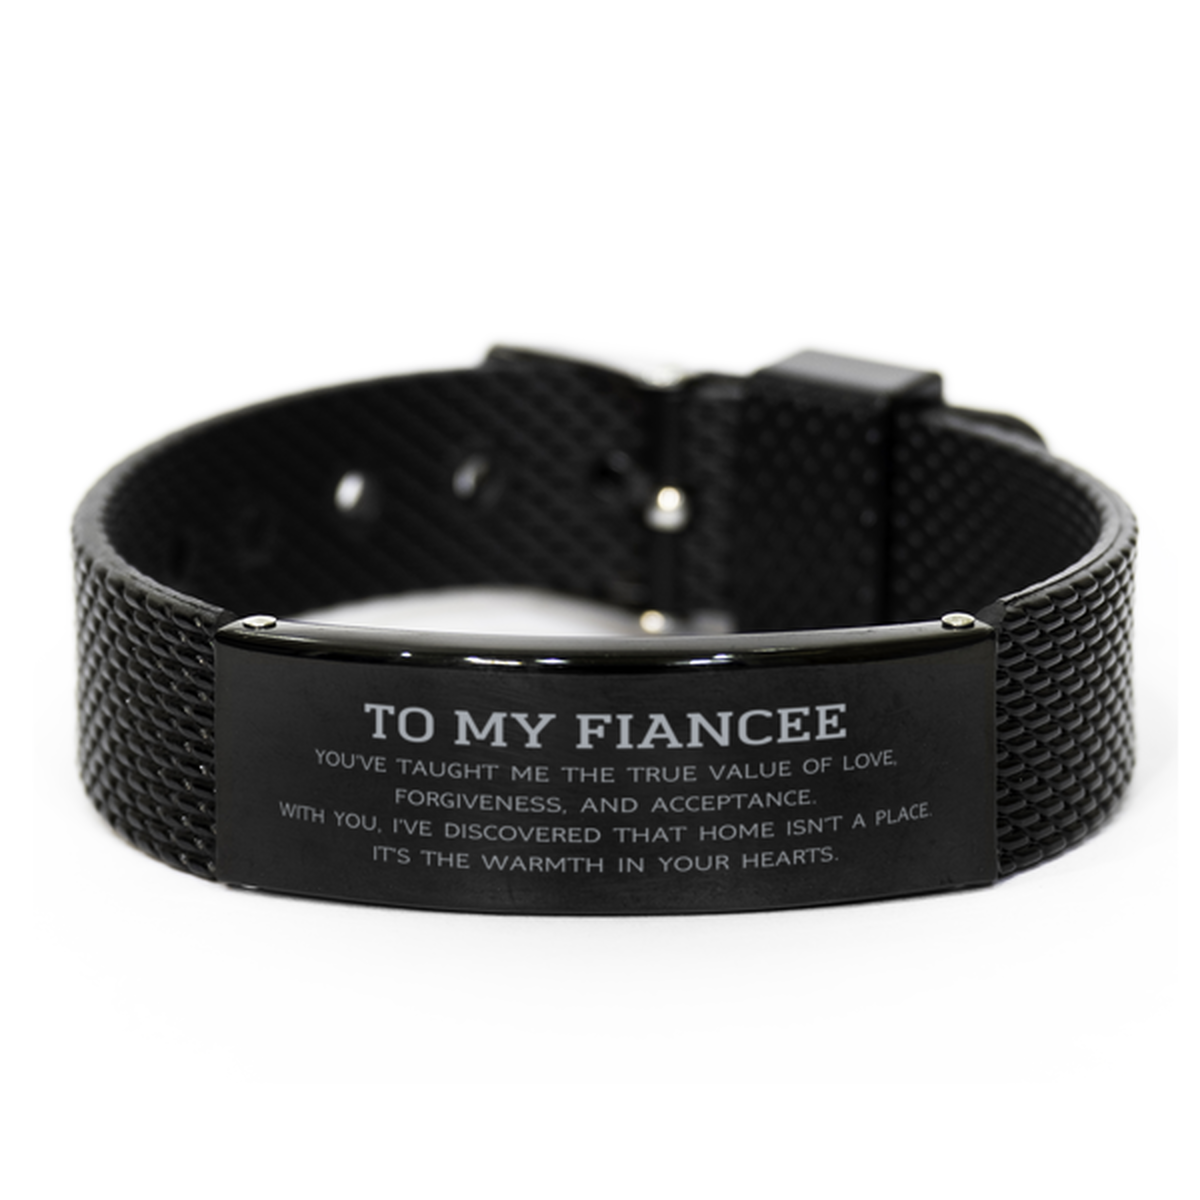 To My Fiancee Gifts, You've taught me the true value of love, Thank You Gifts For Fiancee, Birthday Black Shark Mesh Bracelet For Fiancee